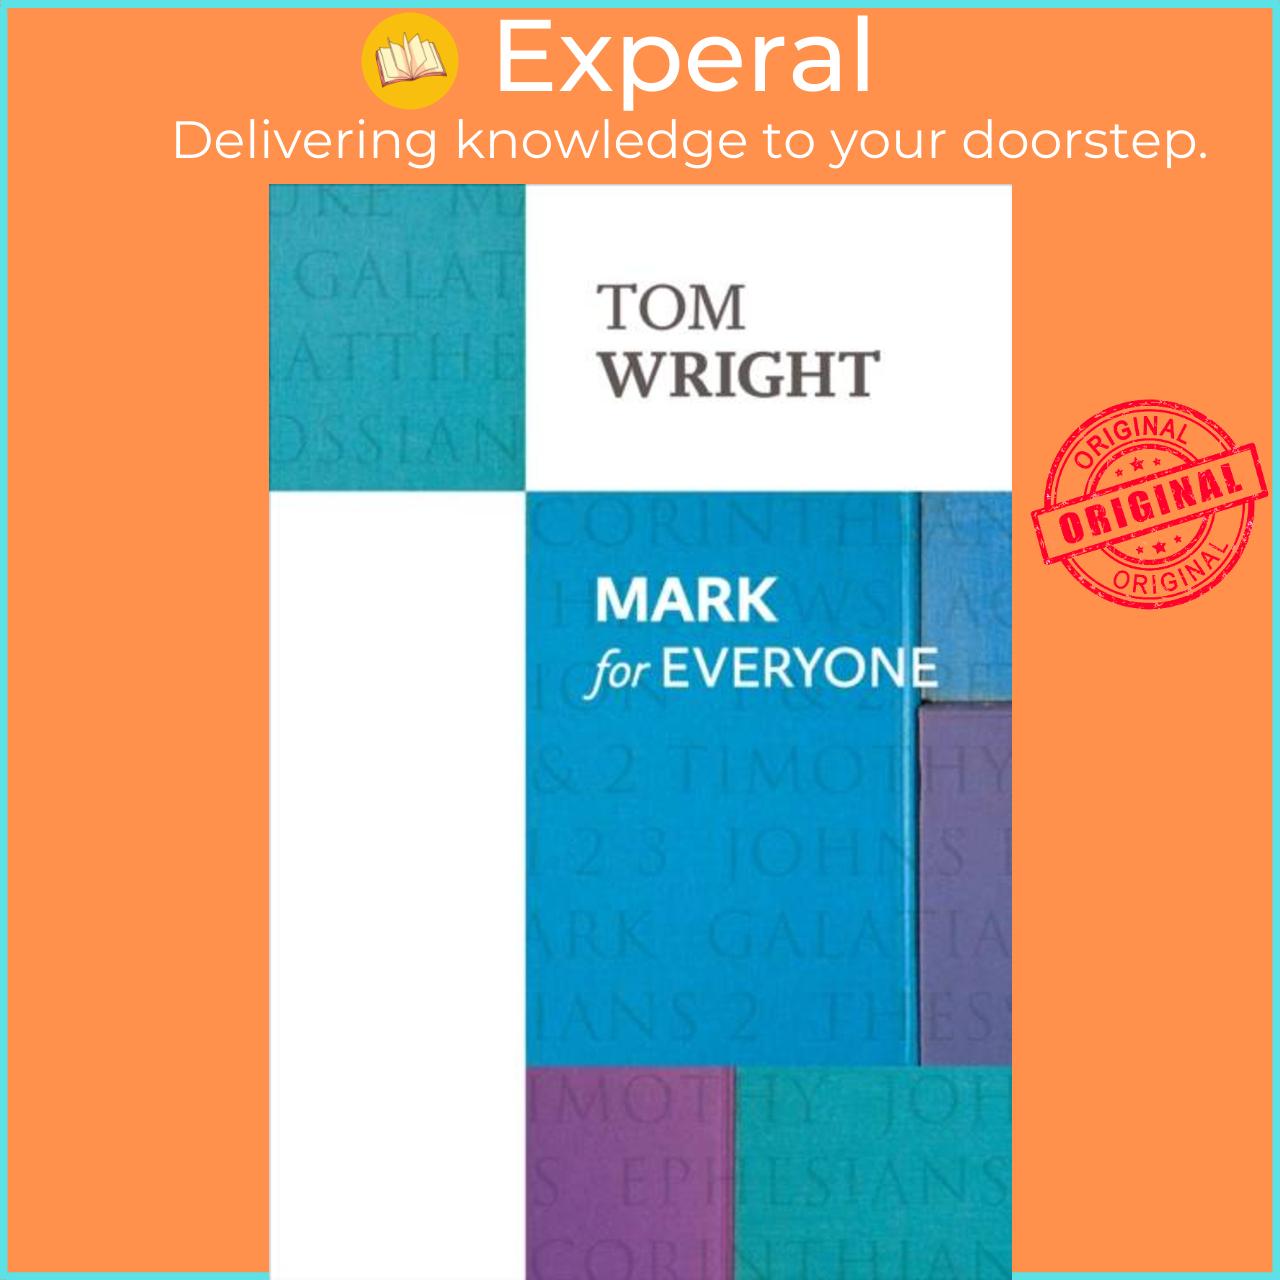 Sách - Mark for Everyone by Tom Wright (UK edition, paperback)